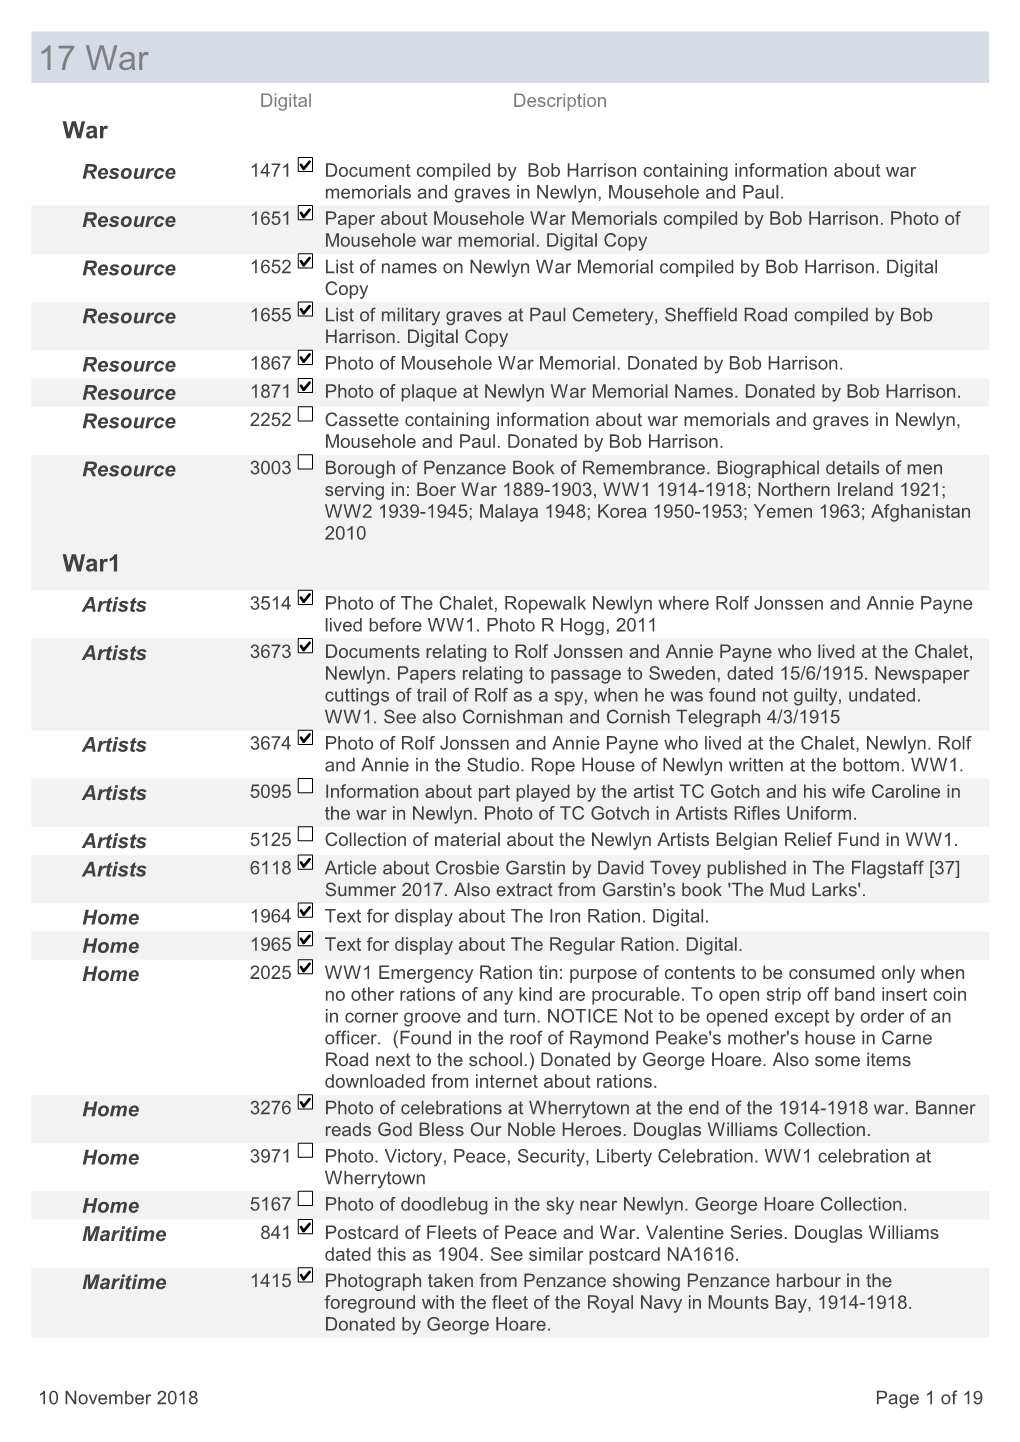 17 War Digital Description War Resource 1471 Document Compiled by Bob Harrison Containing Information About War Memorials and Graves in Newlyn, Mousehole and Paul